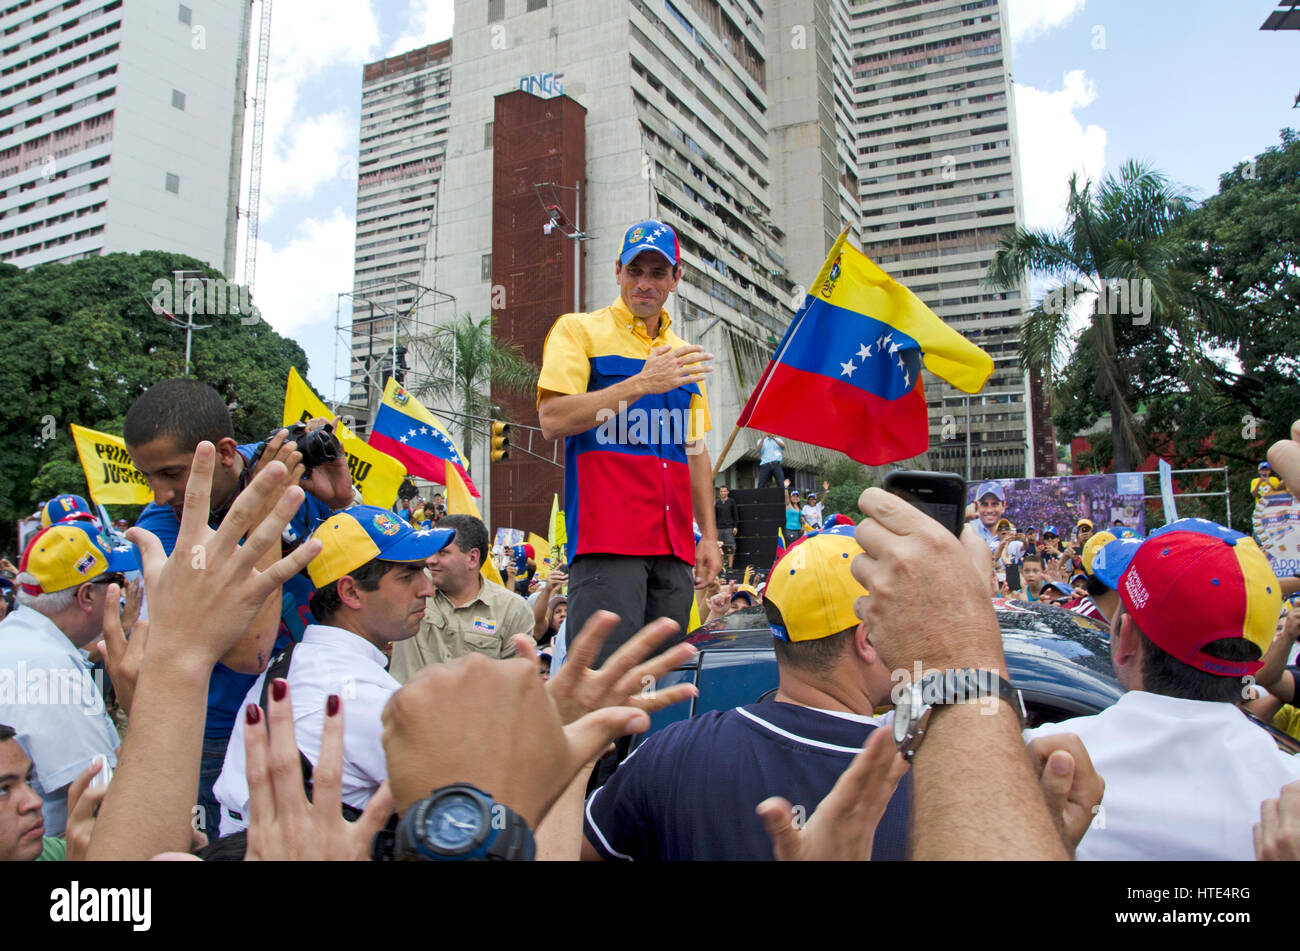 The opposition candidate Henrique Capriles Radonski attends a massive rally in Caracas. Stock Photo